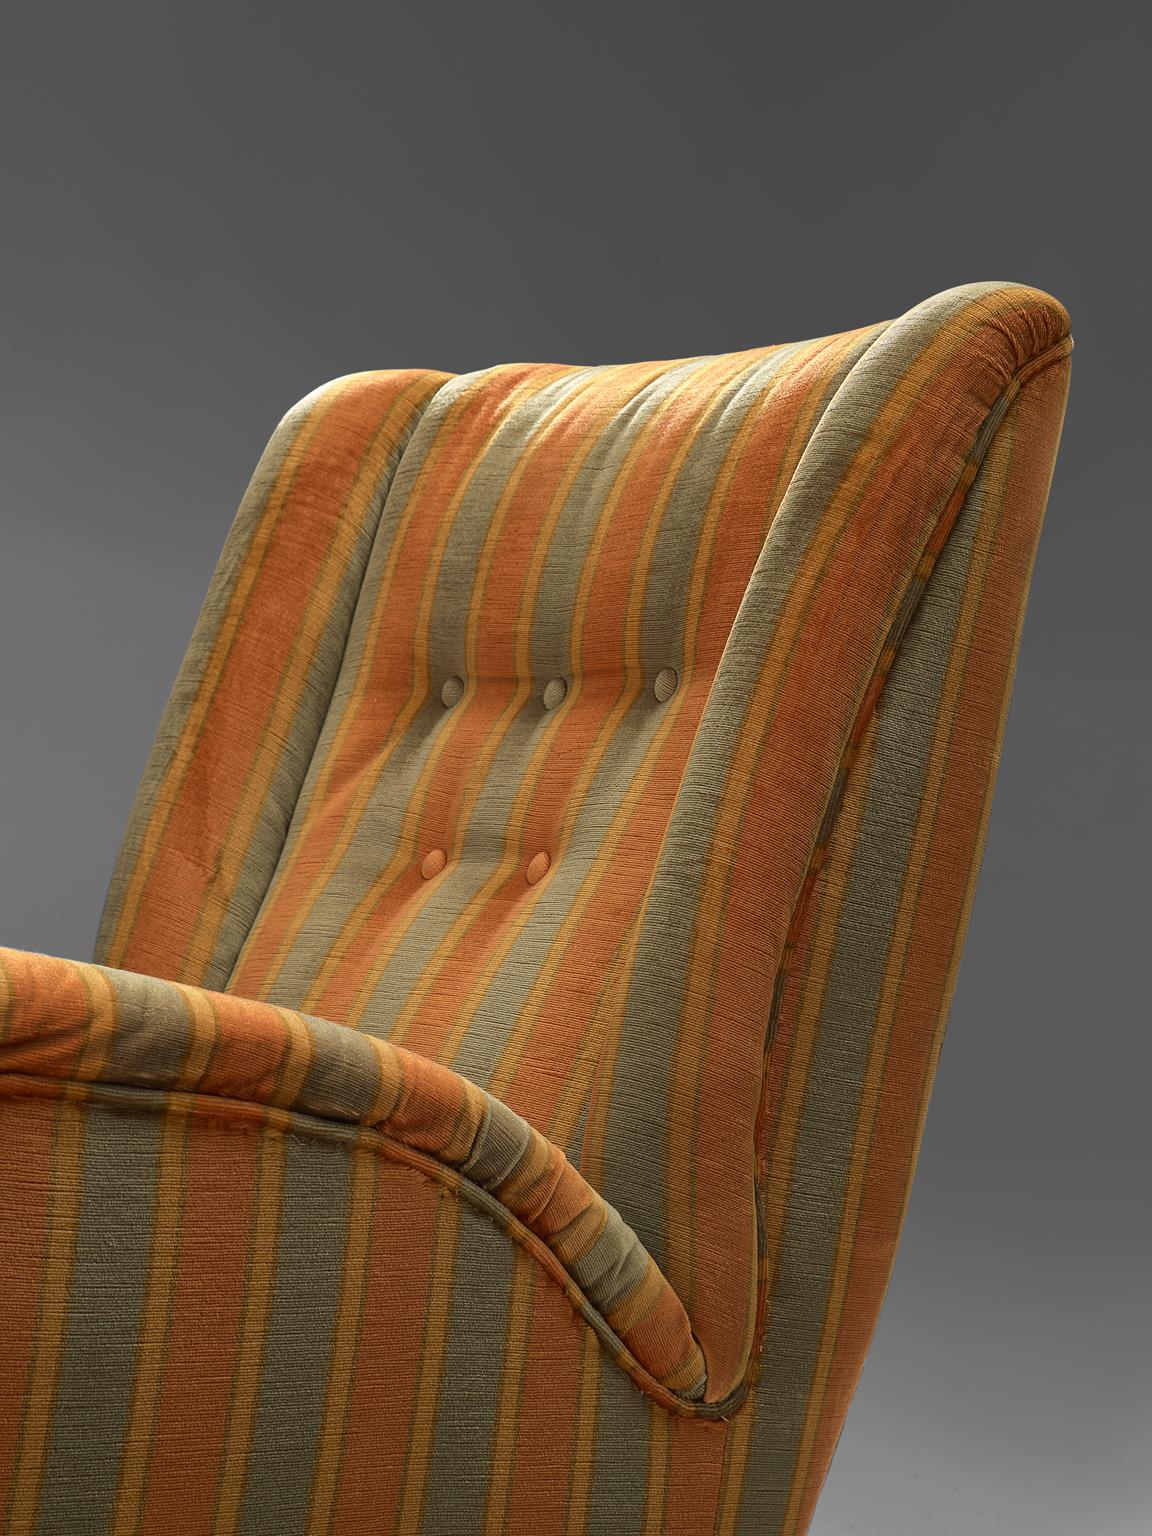 Mid-20th Century Italian Pair of High Back Chairs in Green and Orange Striped Upholstery